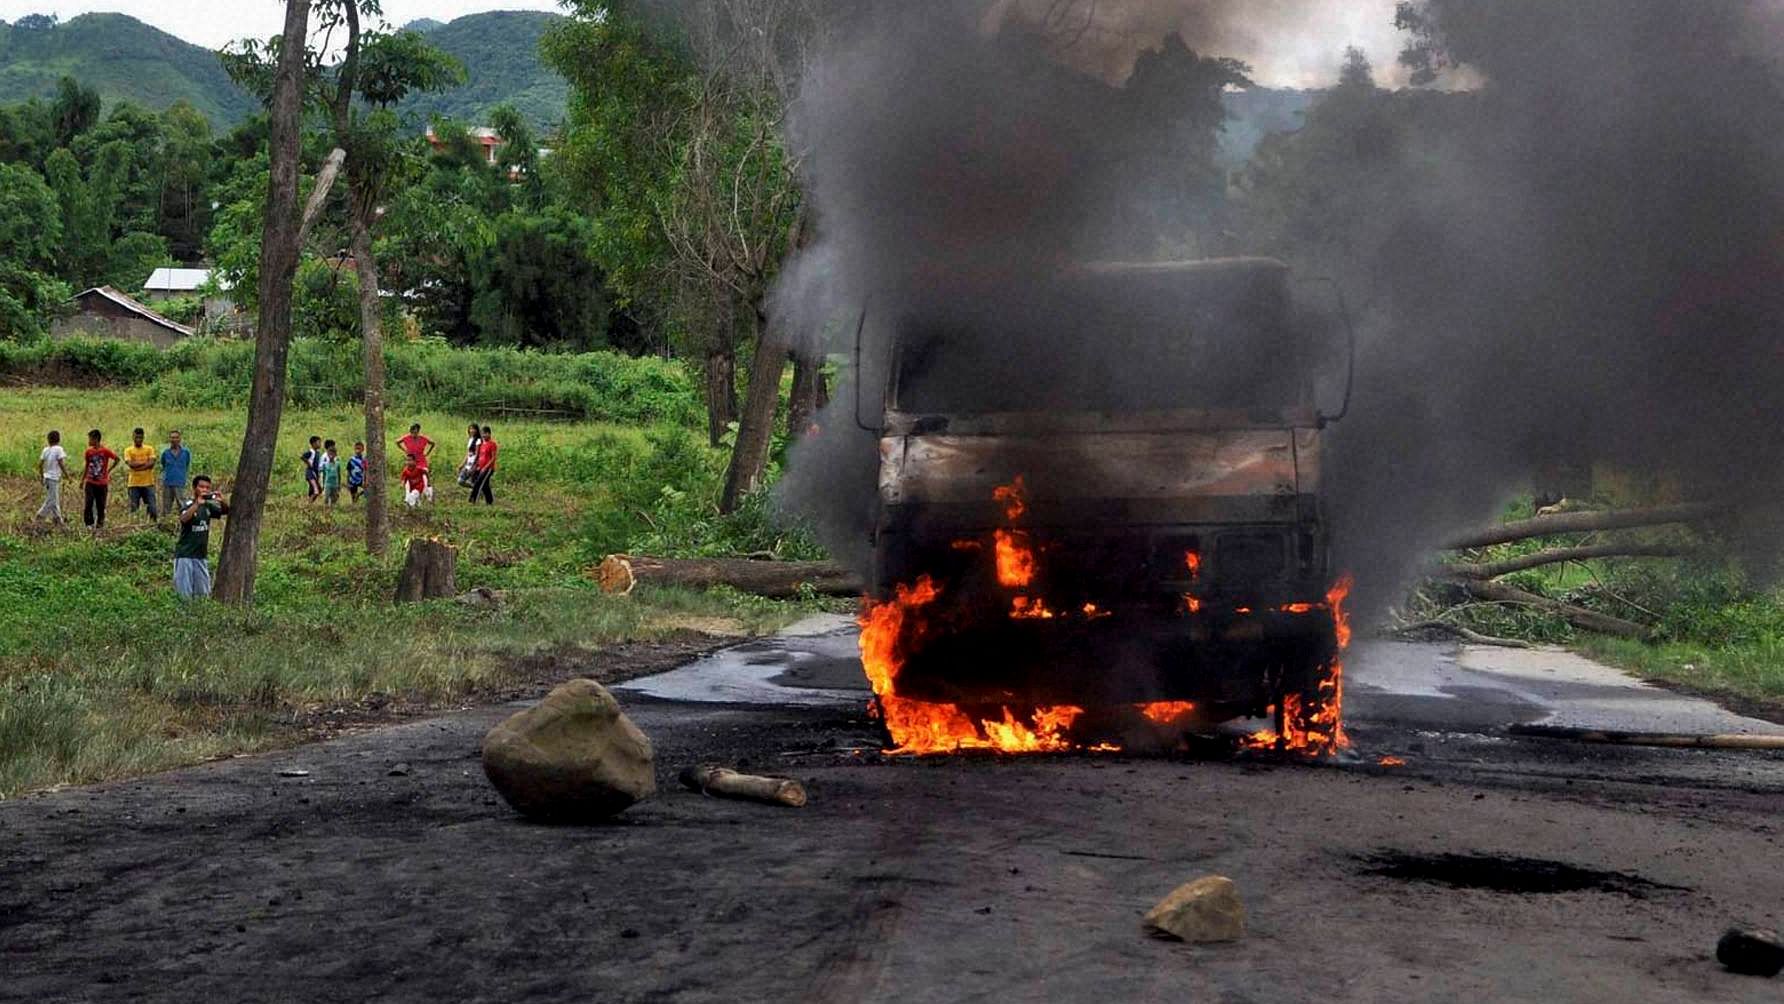 Protesters burn a police vehicle in Churachandpur district of Manipur on Tuesday in protest against the passage of allegedly “anti-tribal” bills in the Manipur assembly. (Photo: PTI)